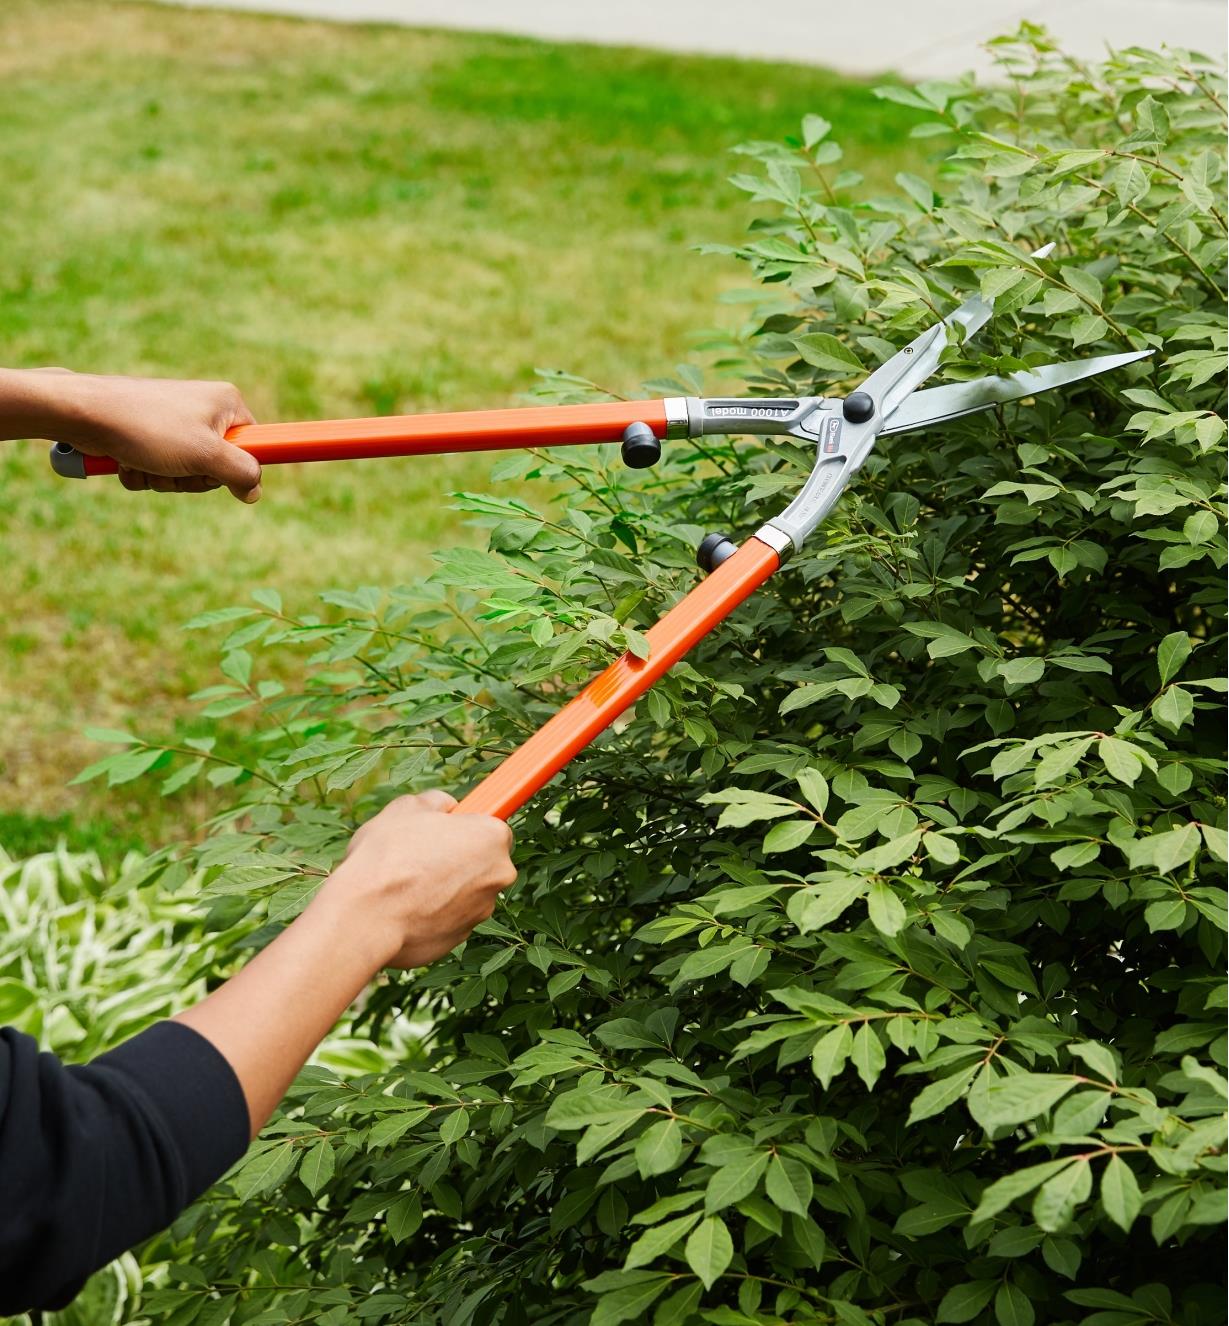 Trimming a shrub with long-handled shears